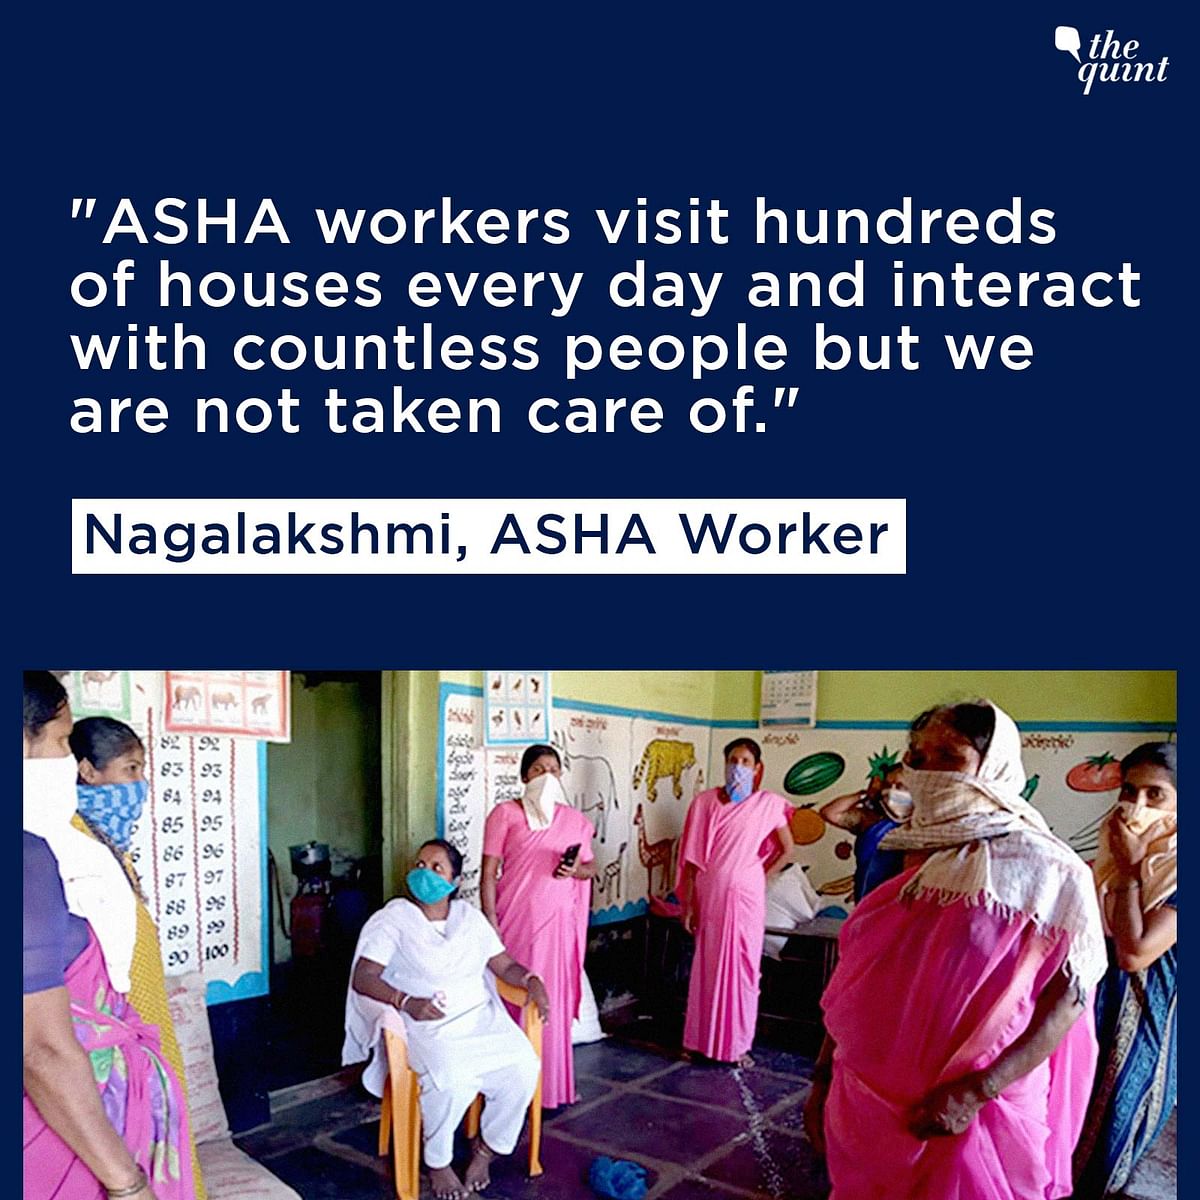 ASHA workers are women who are an interface between the community and the public health system.